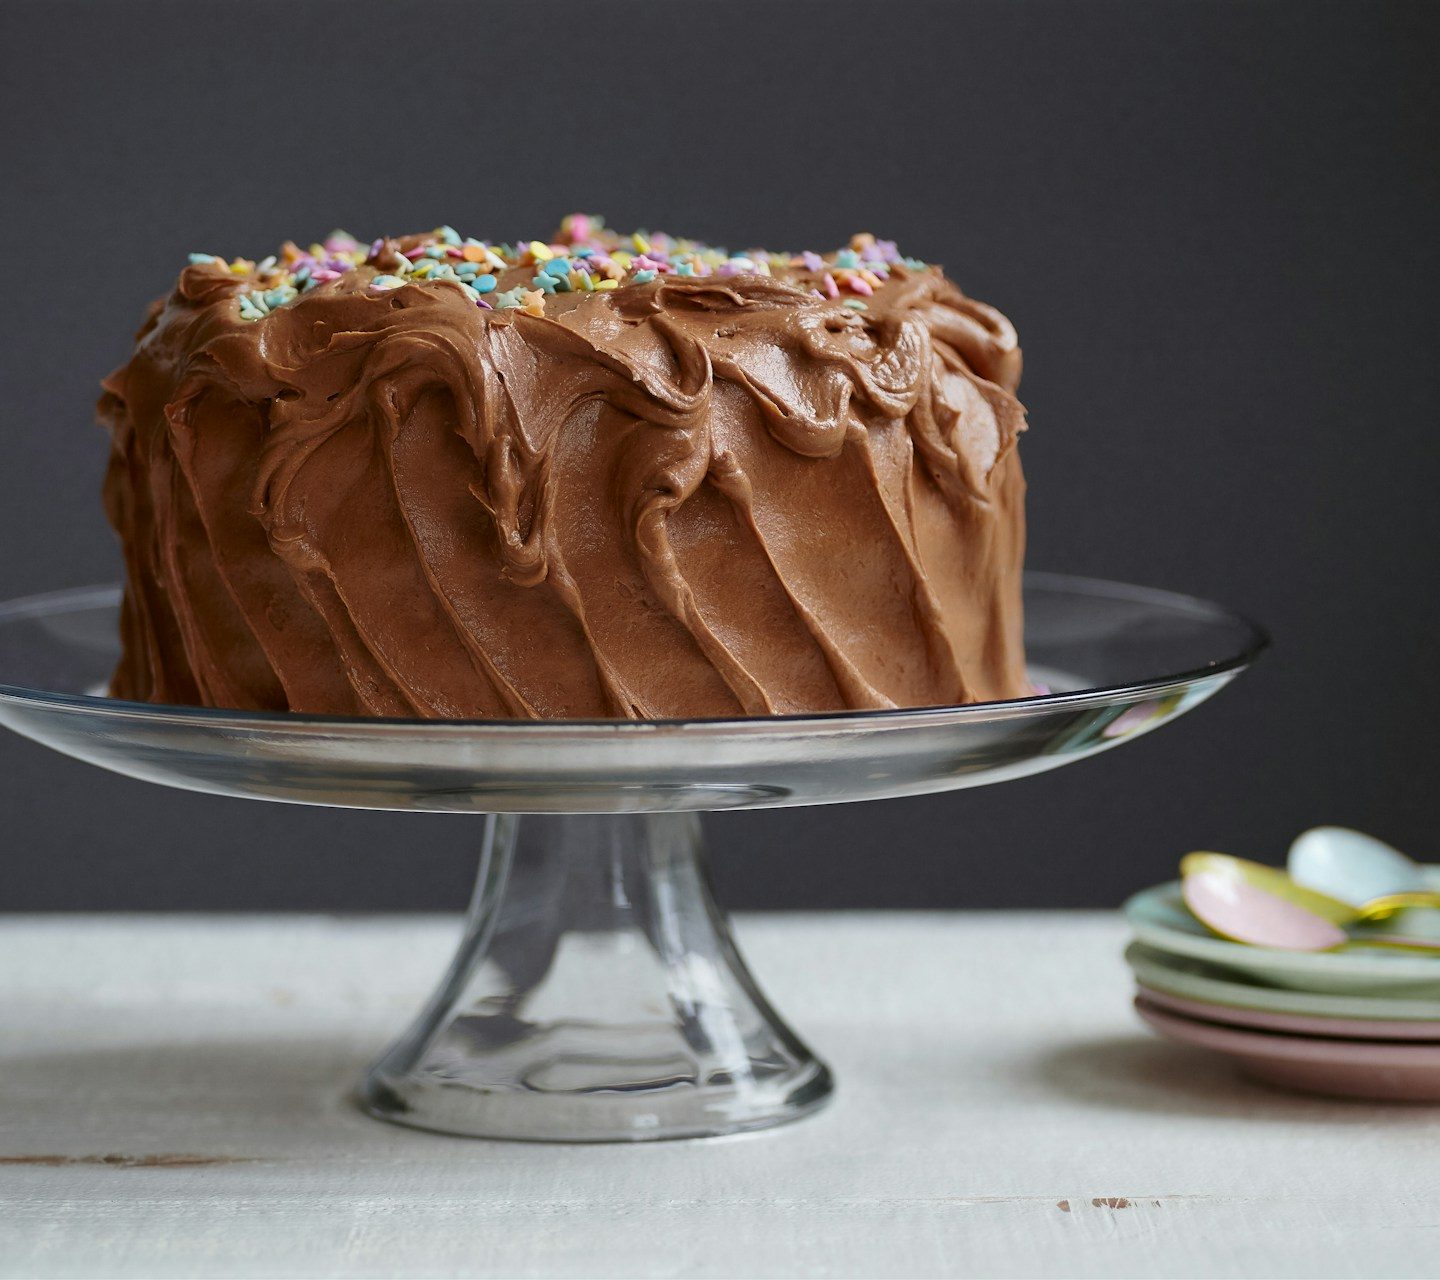 The Sweet Revolution: How Dietary-Specific Cakes Are Changing the Baking Game